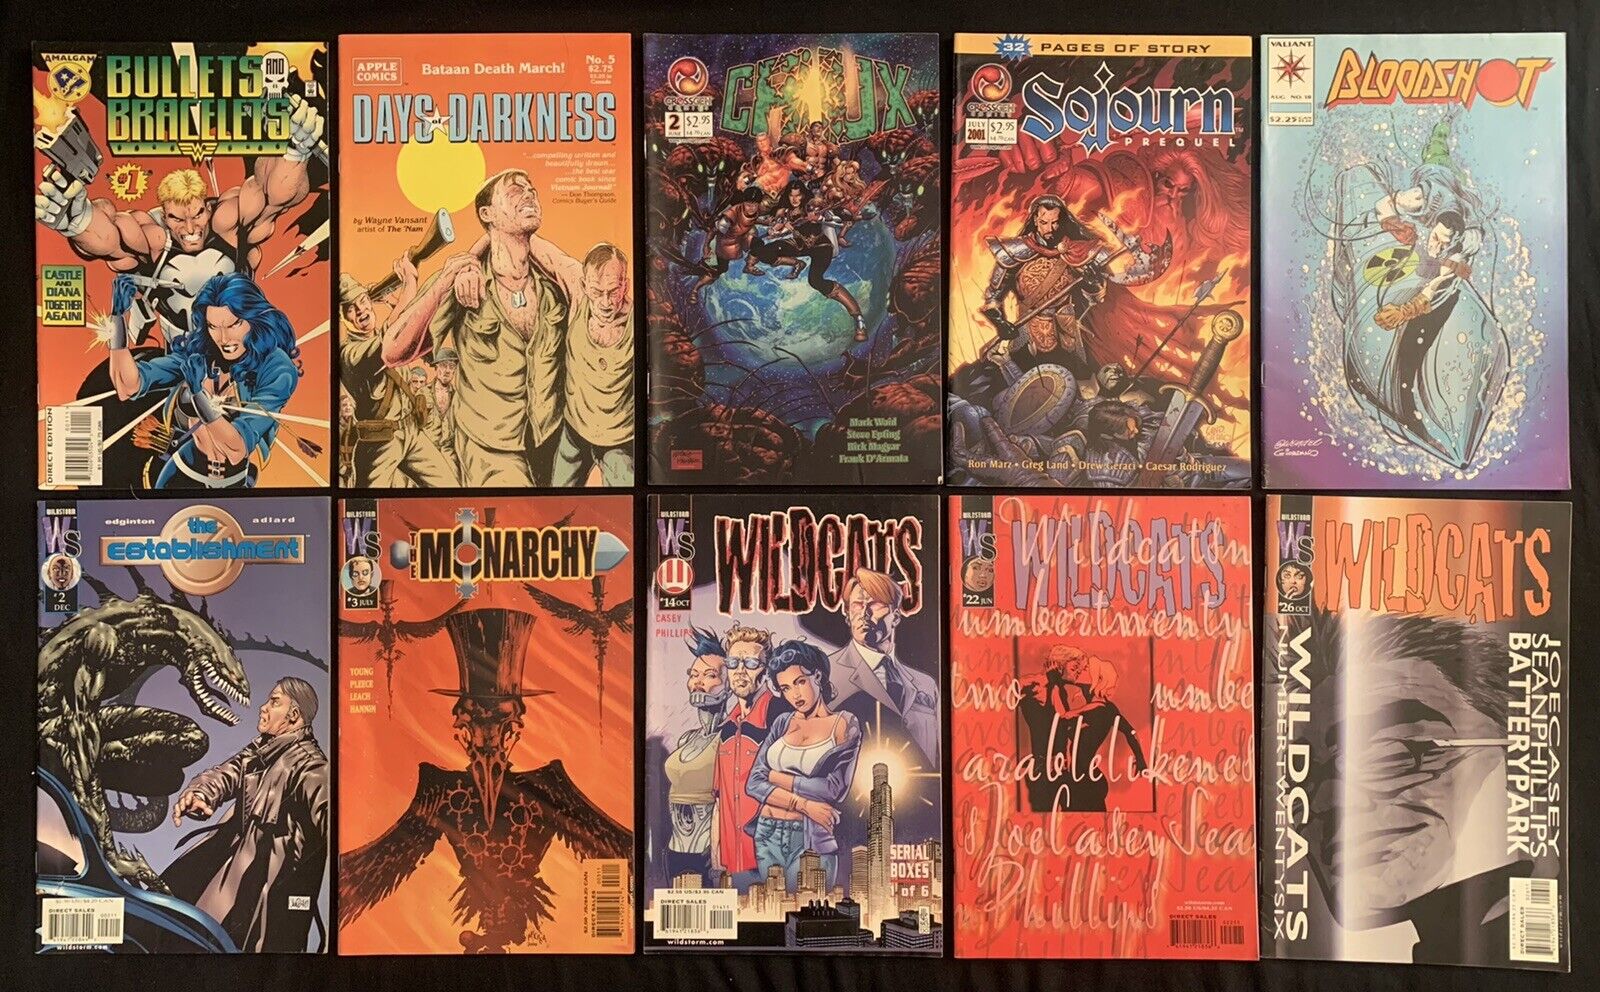 Comics Lot: WILDCATS #14,22,26, Sojourn Prequel #1, Days of Darkness #5 & More